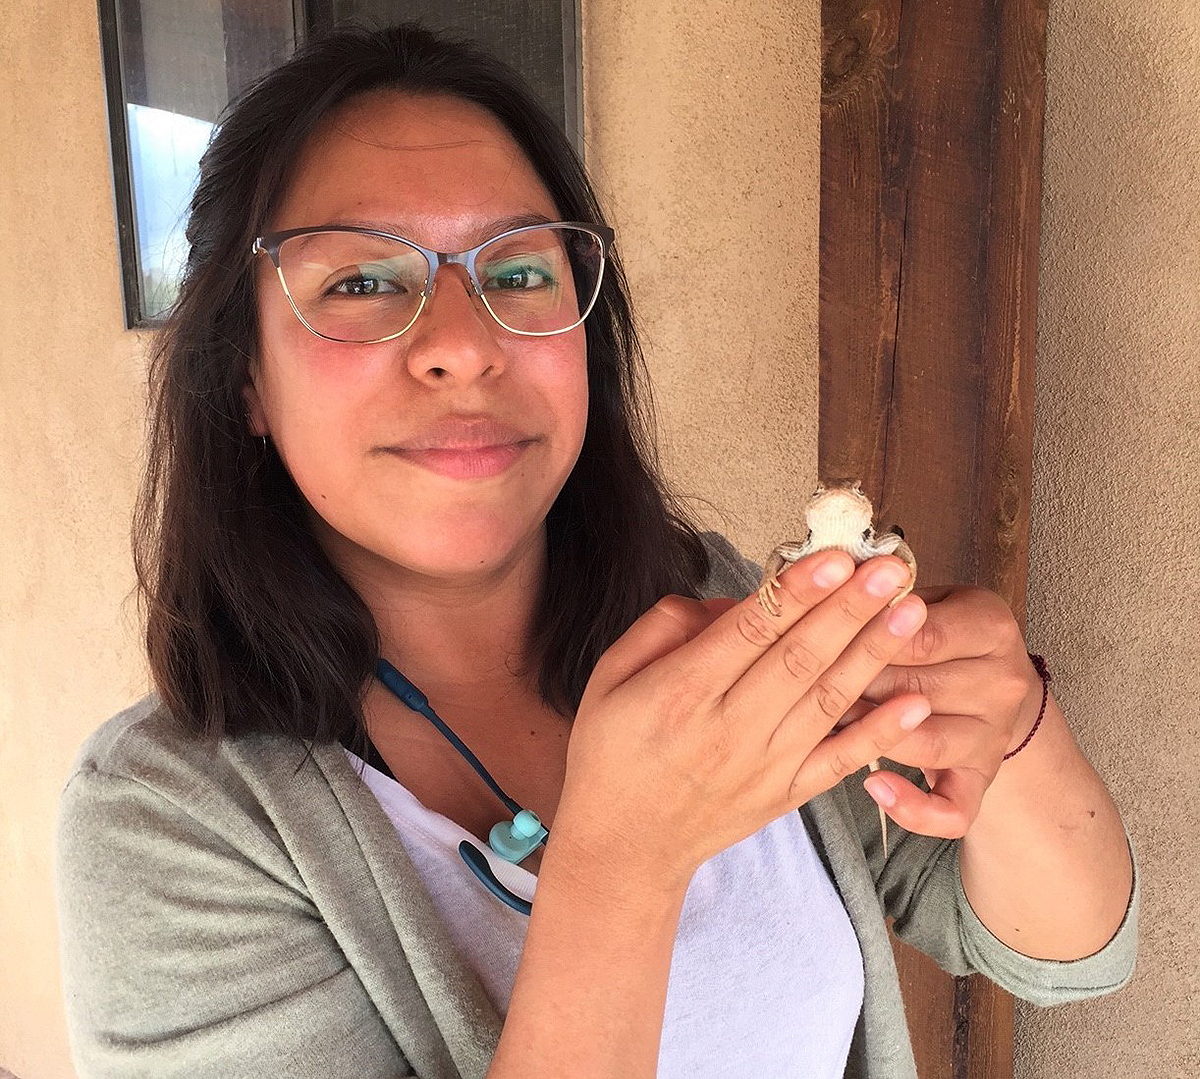 MTSU senior biology major Denise Ortega of Madison, Tenn., holds a lizard she was studying in 2019 while on a National Science Foundation research trip to New Mexico. Ortega has received a 2021 Goldwater Scholarship. She plans to graduate in December. (Submitted photo by Vera Ting)